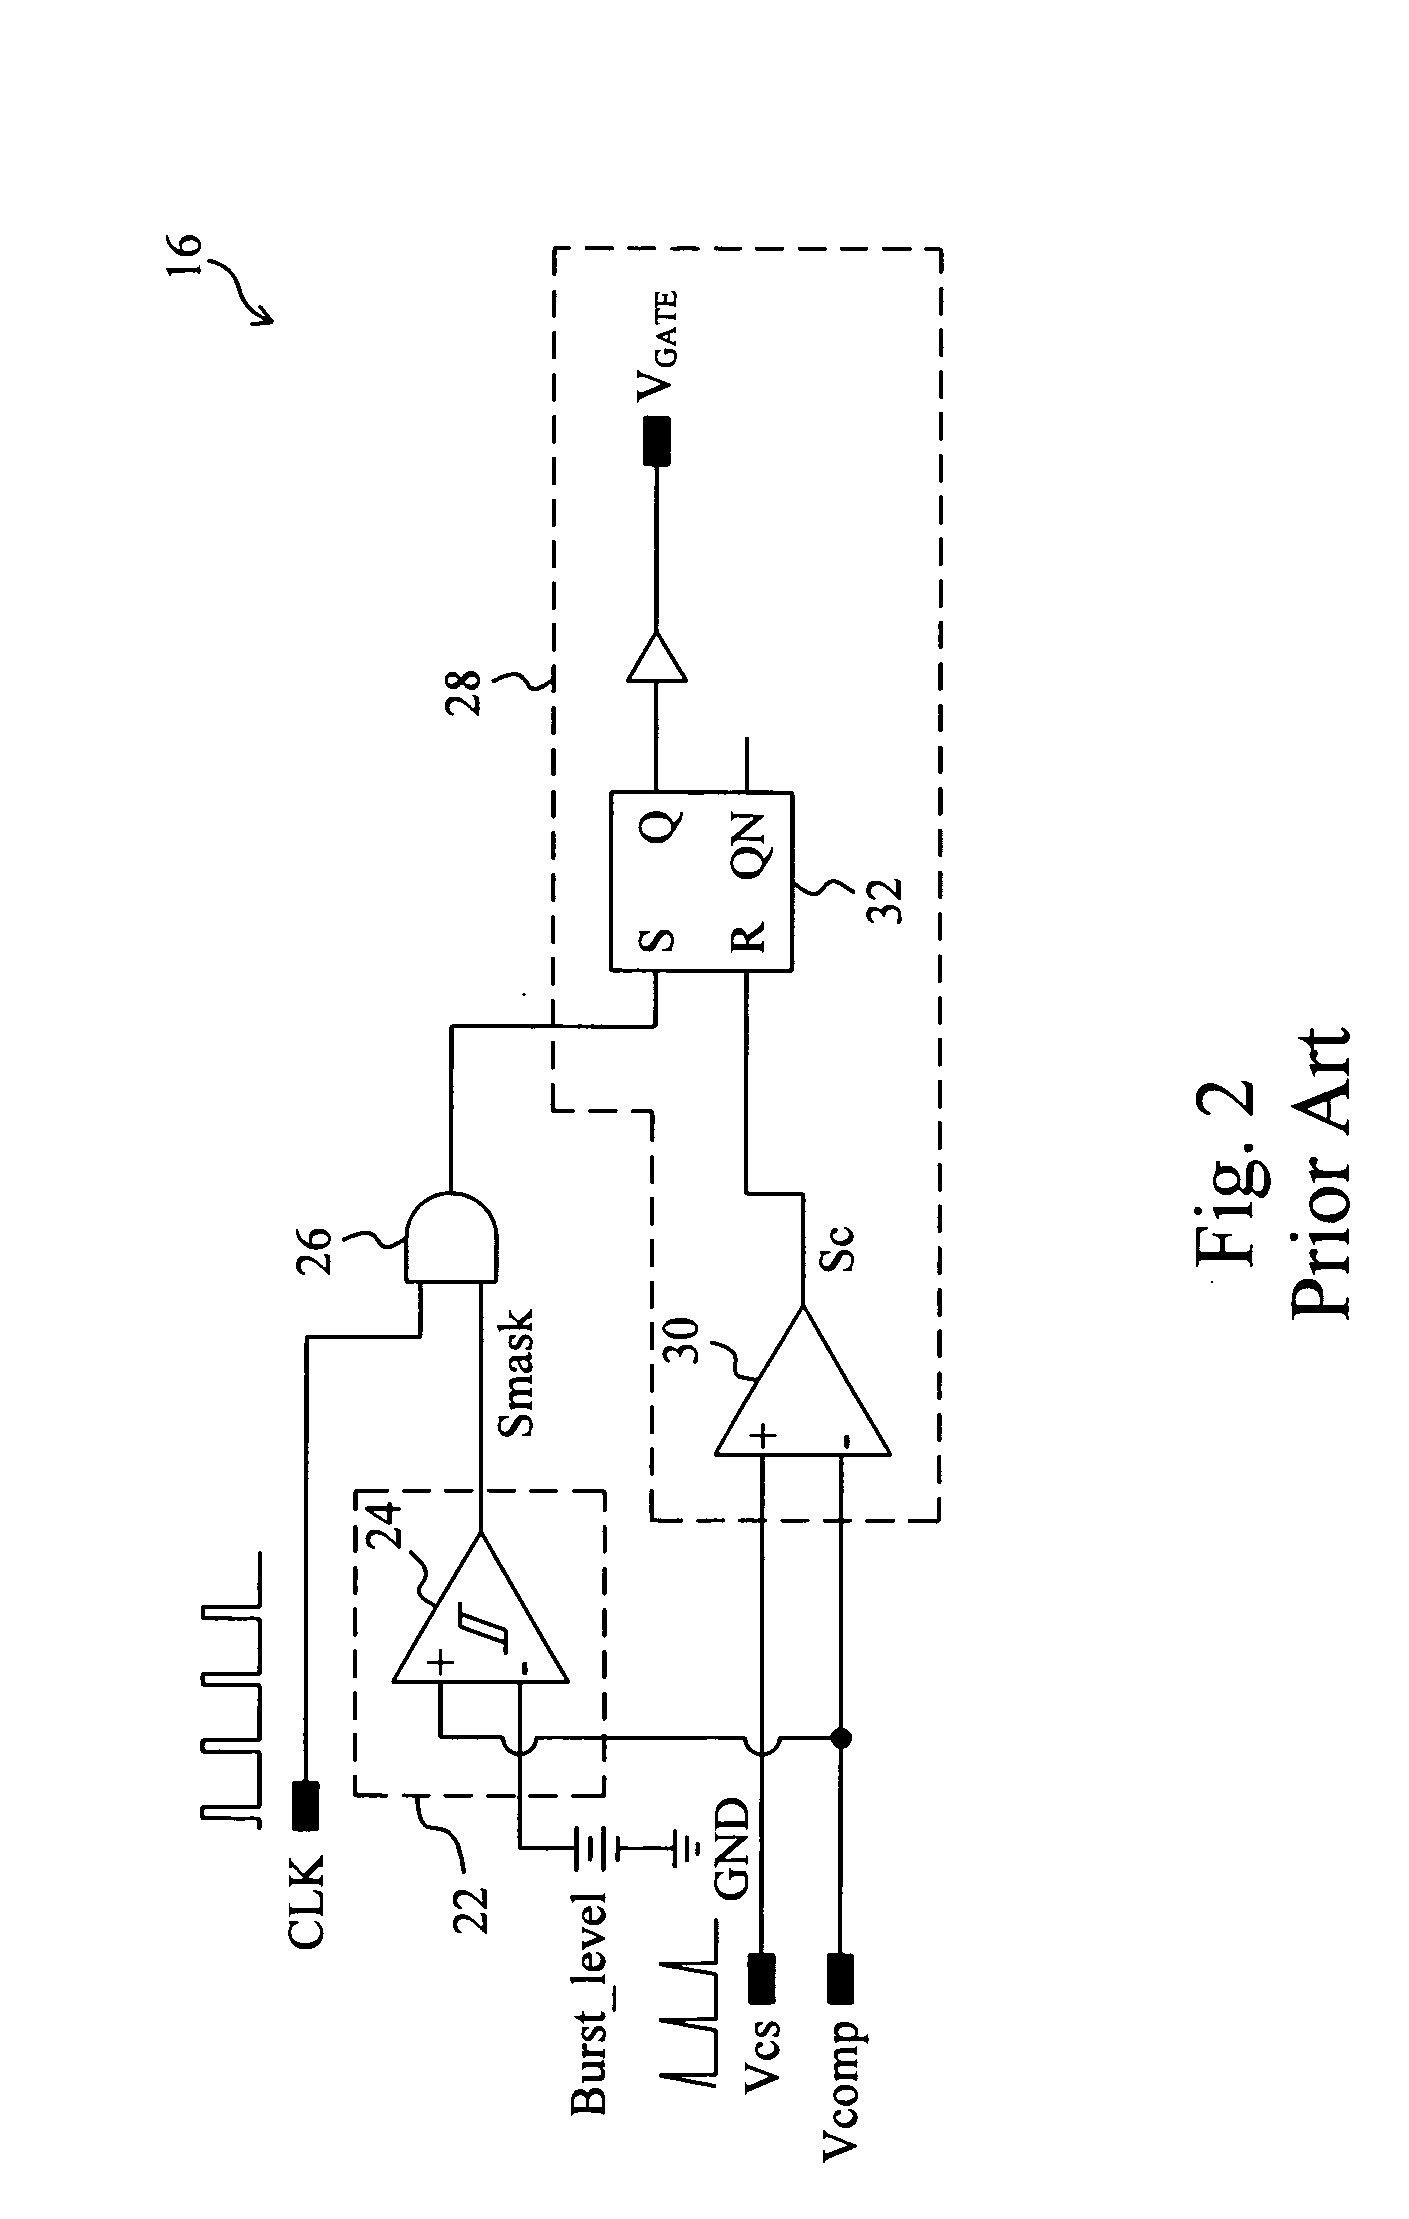 Control circuit and method for a flyback converter